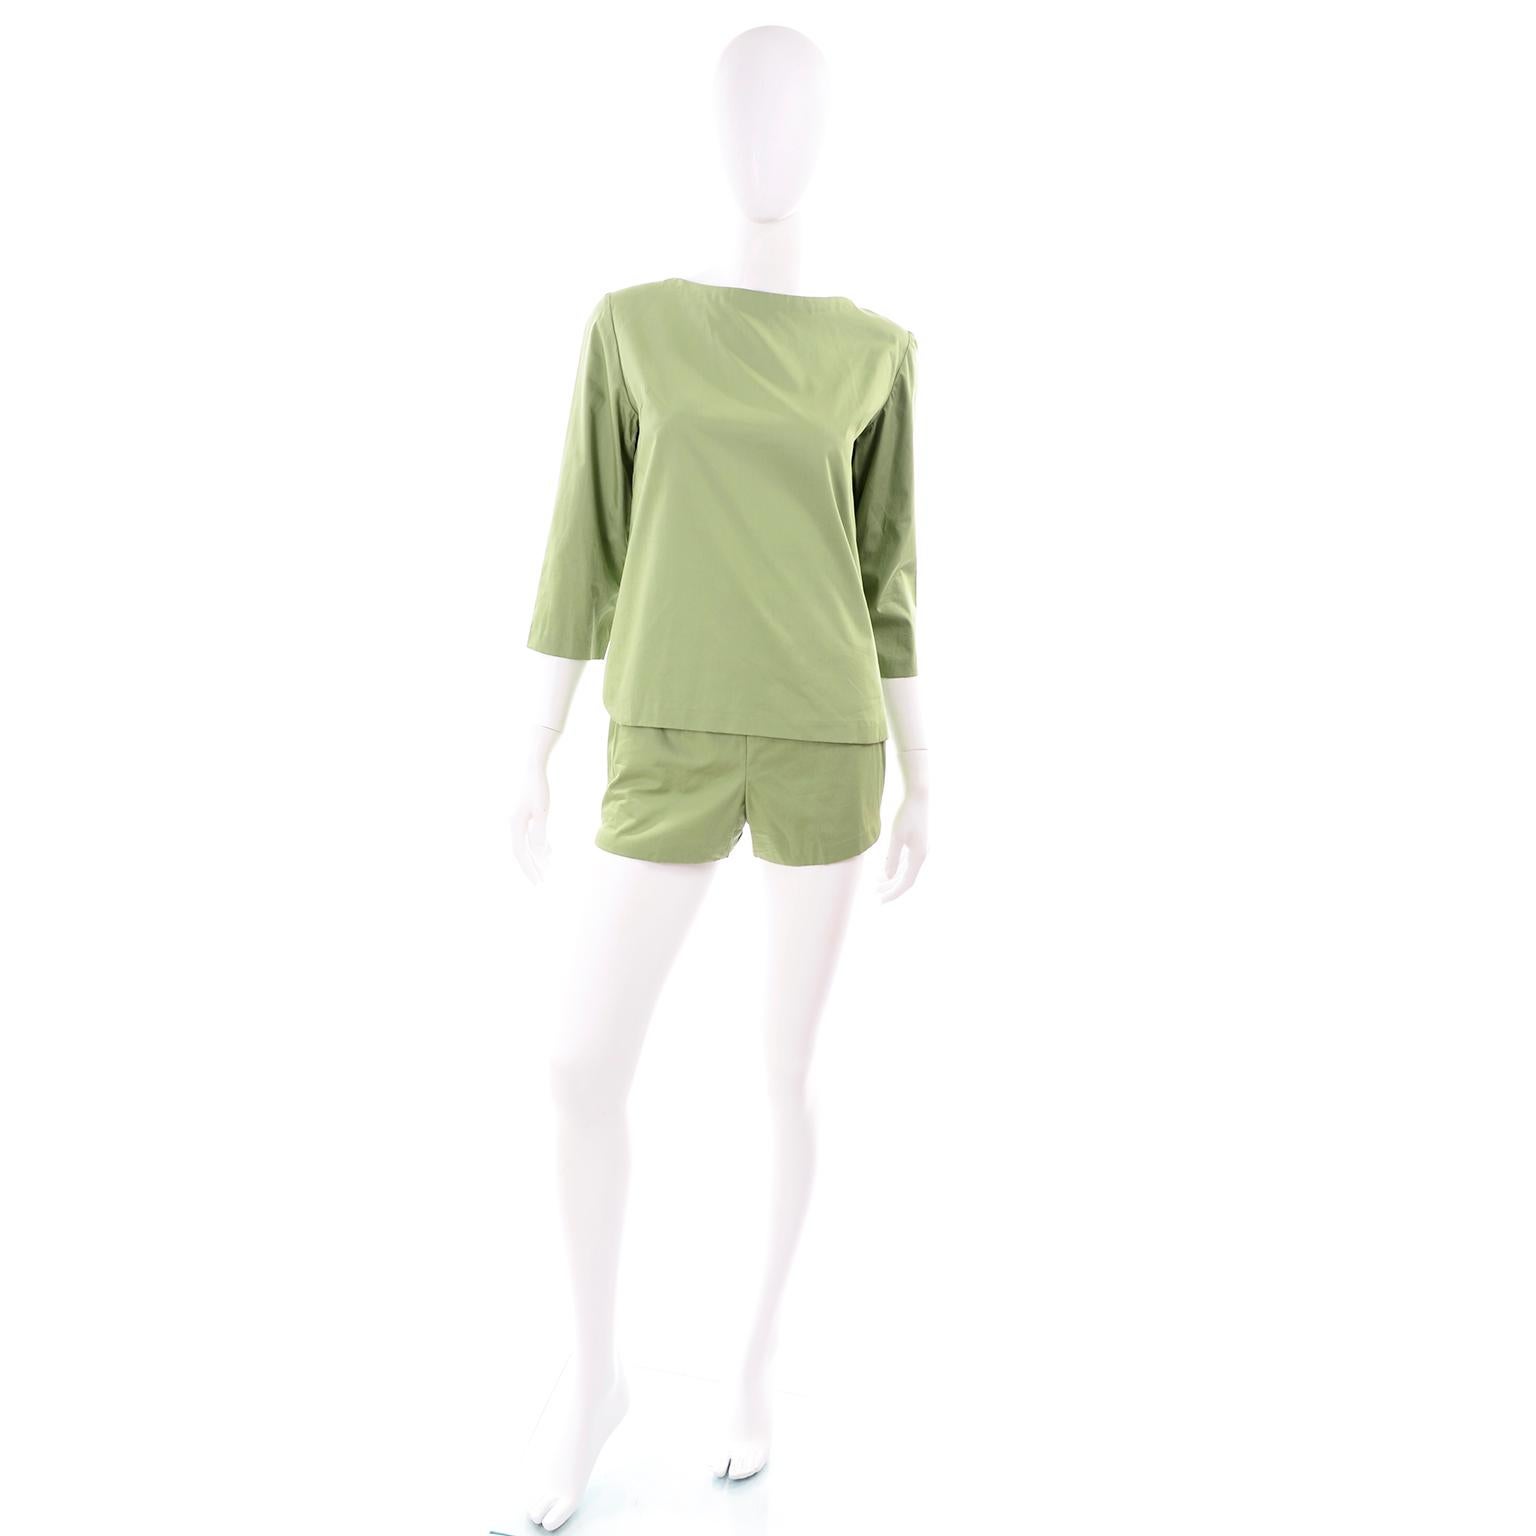 This perfectly chic H. Cosentino of Capri green cotton outfit was made in Italy in the early 1960's. This ensemble includes a 3/4 length sleeve boat neck tunic top and a pair of high waisted shorts. The outfit comes with a matching green fabric